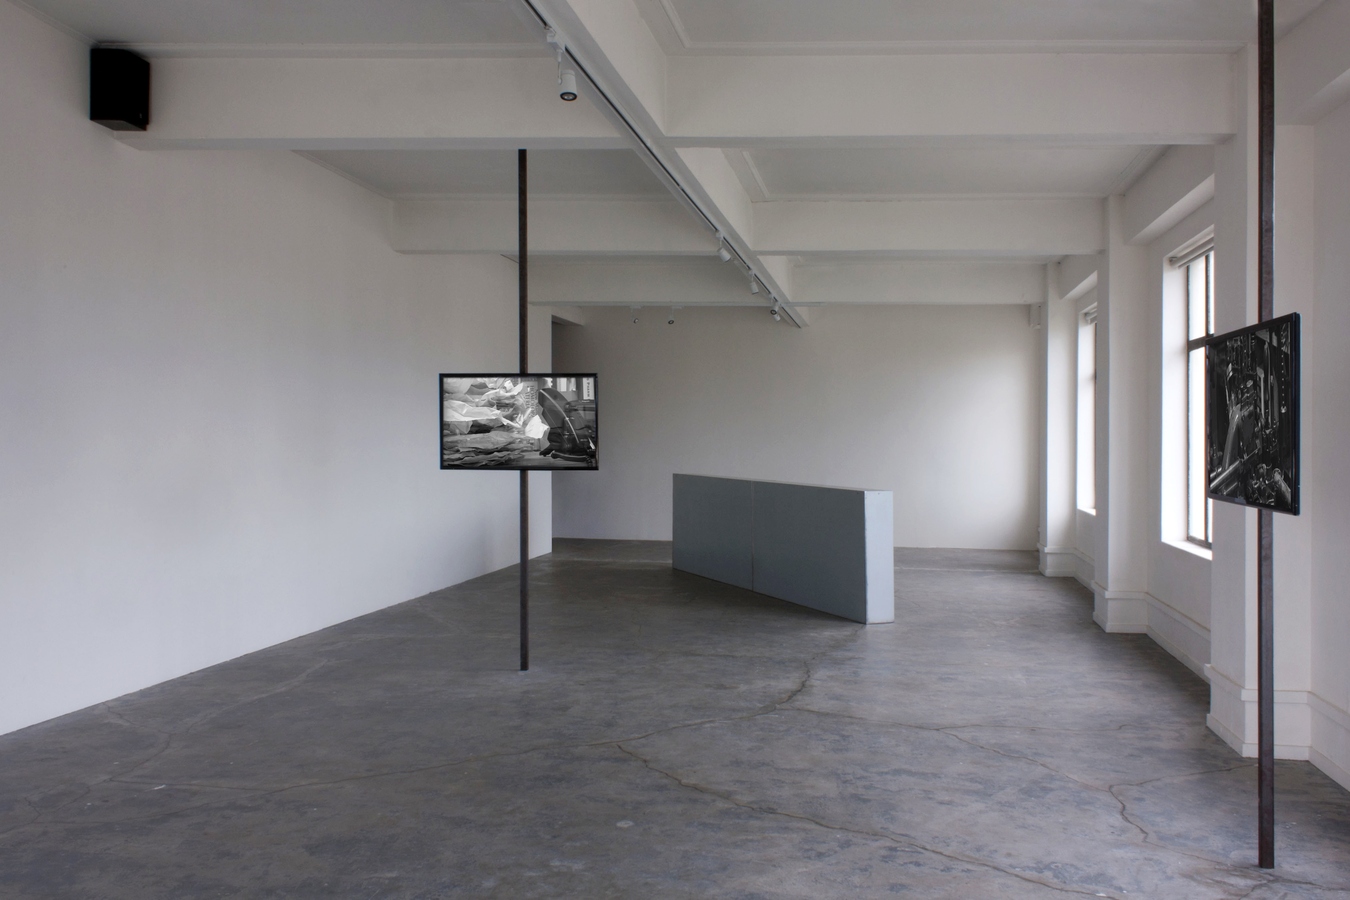 Sonya Lacey, Dilutions and Infinitesimals, installation view